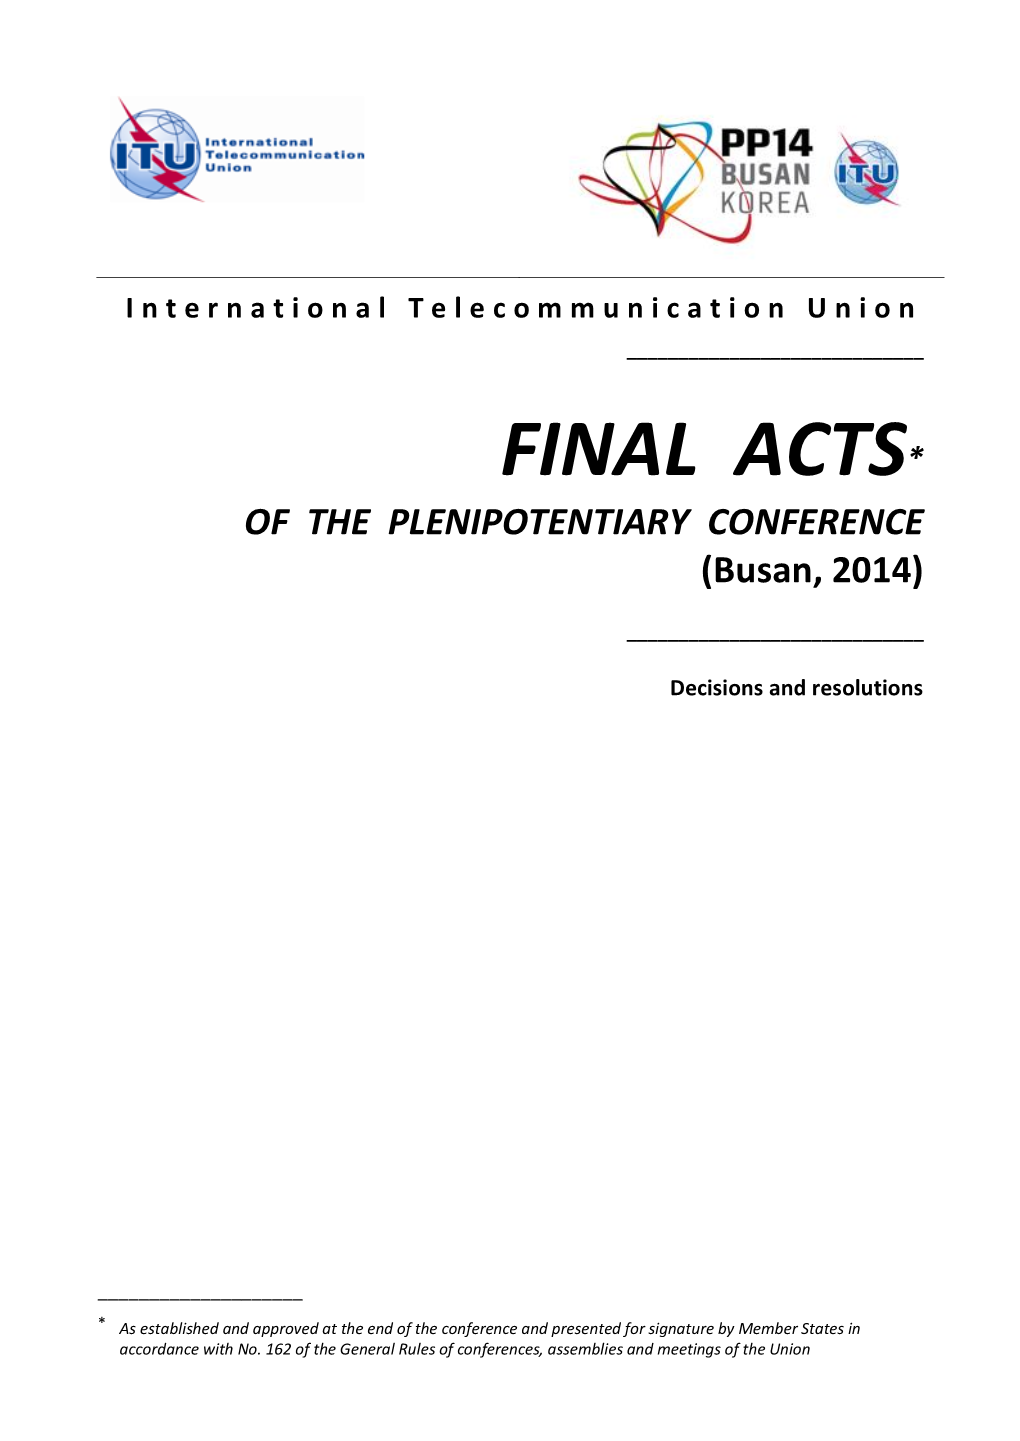 FINAL ACTS* of the PLENIPOTENTIARY CONFERENCE (Busan, 2014)